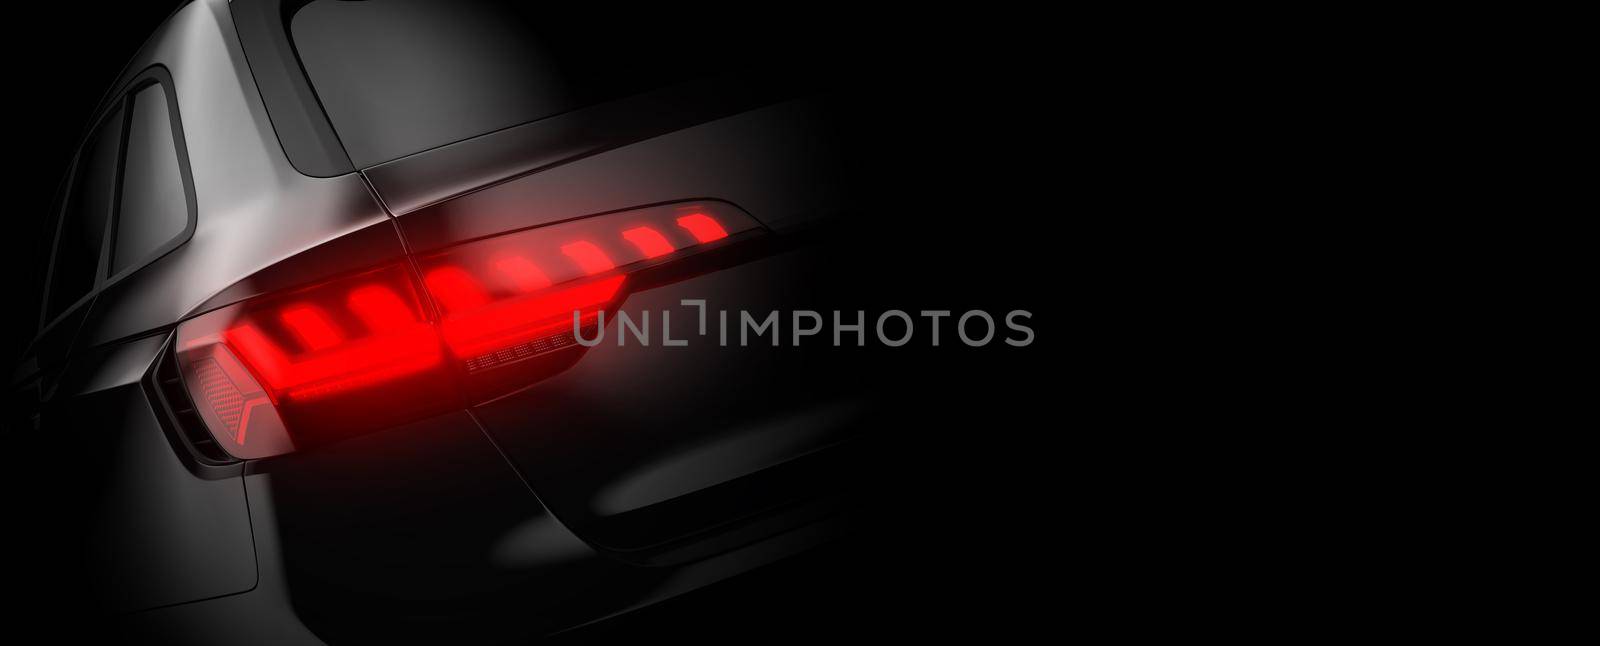 Close up of a backlight of a generic and unbranded car. 3D illustration by cla78